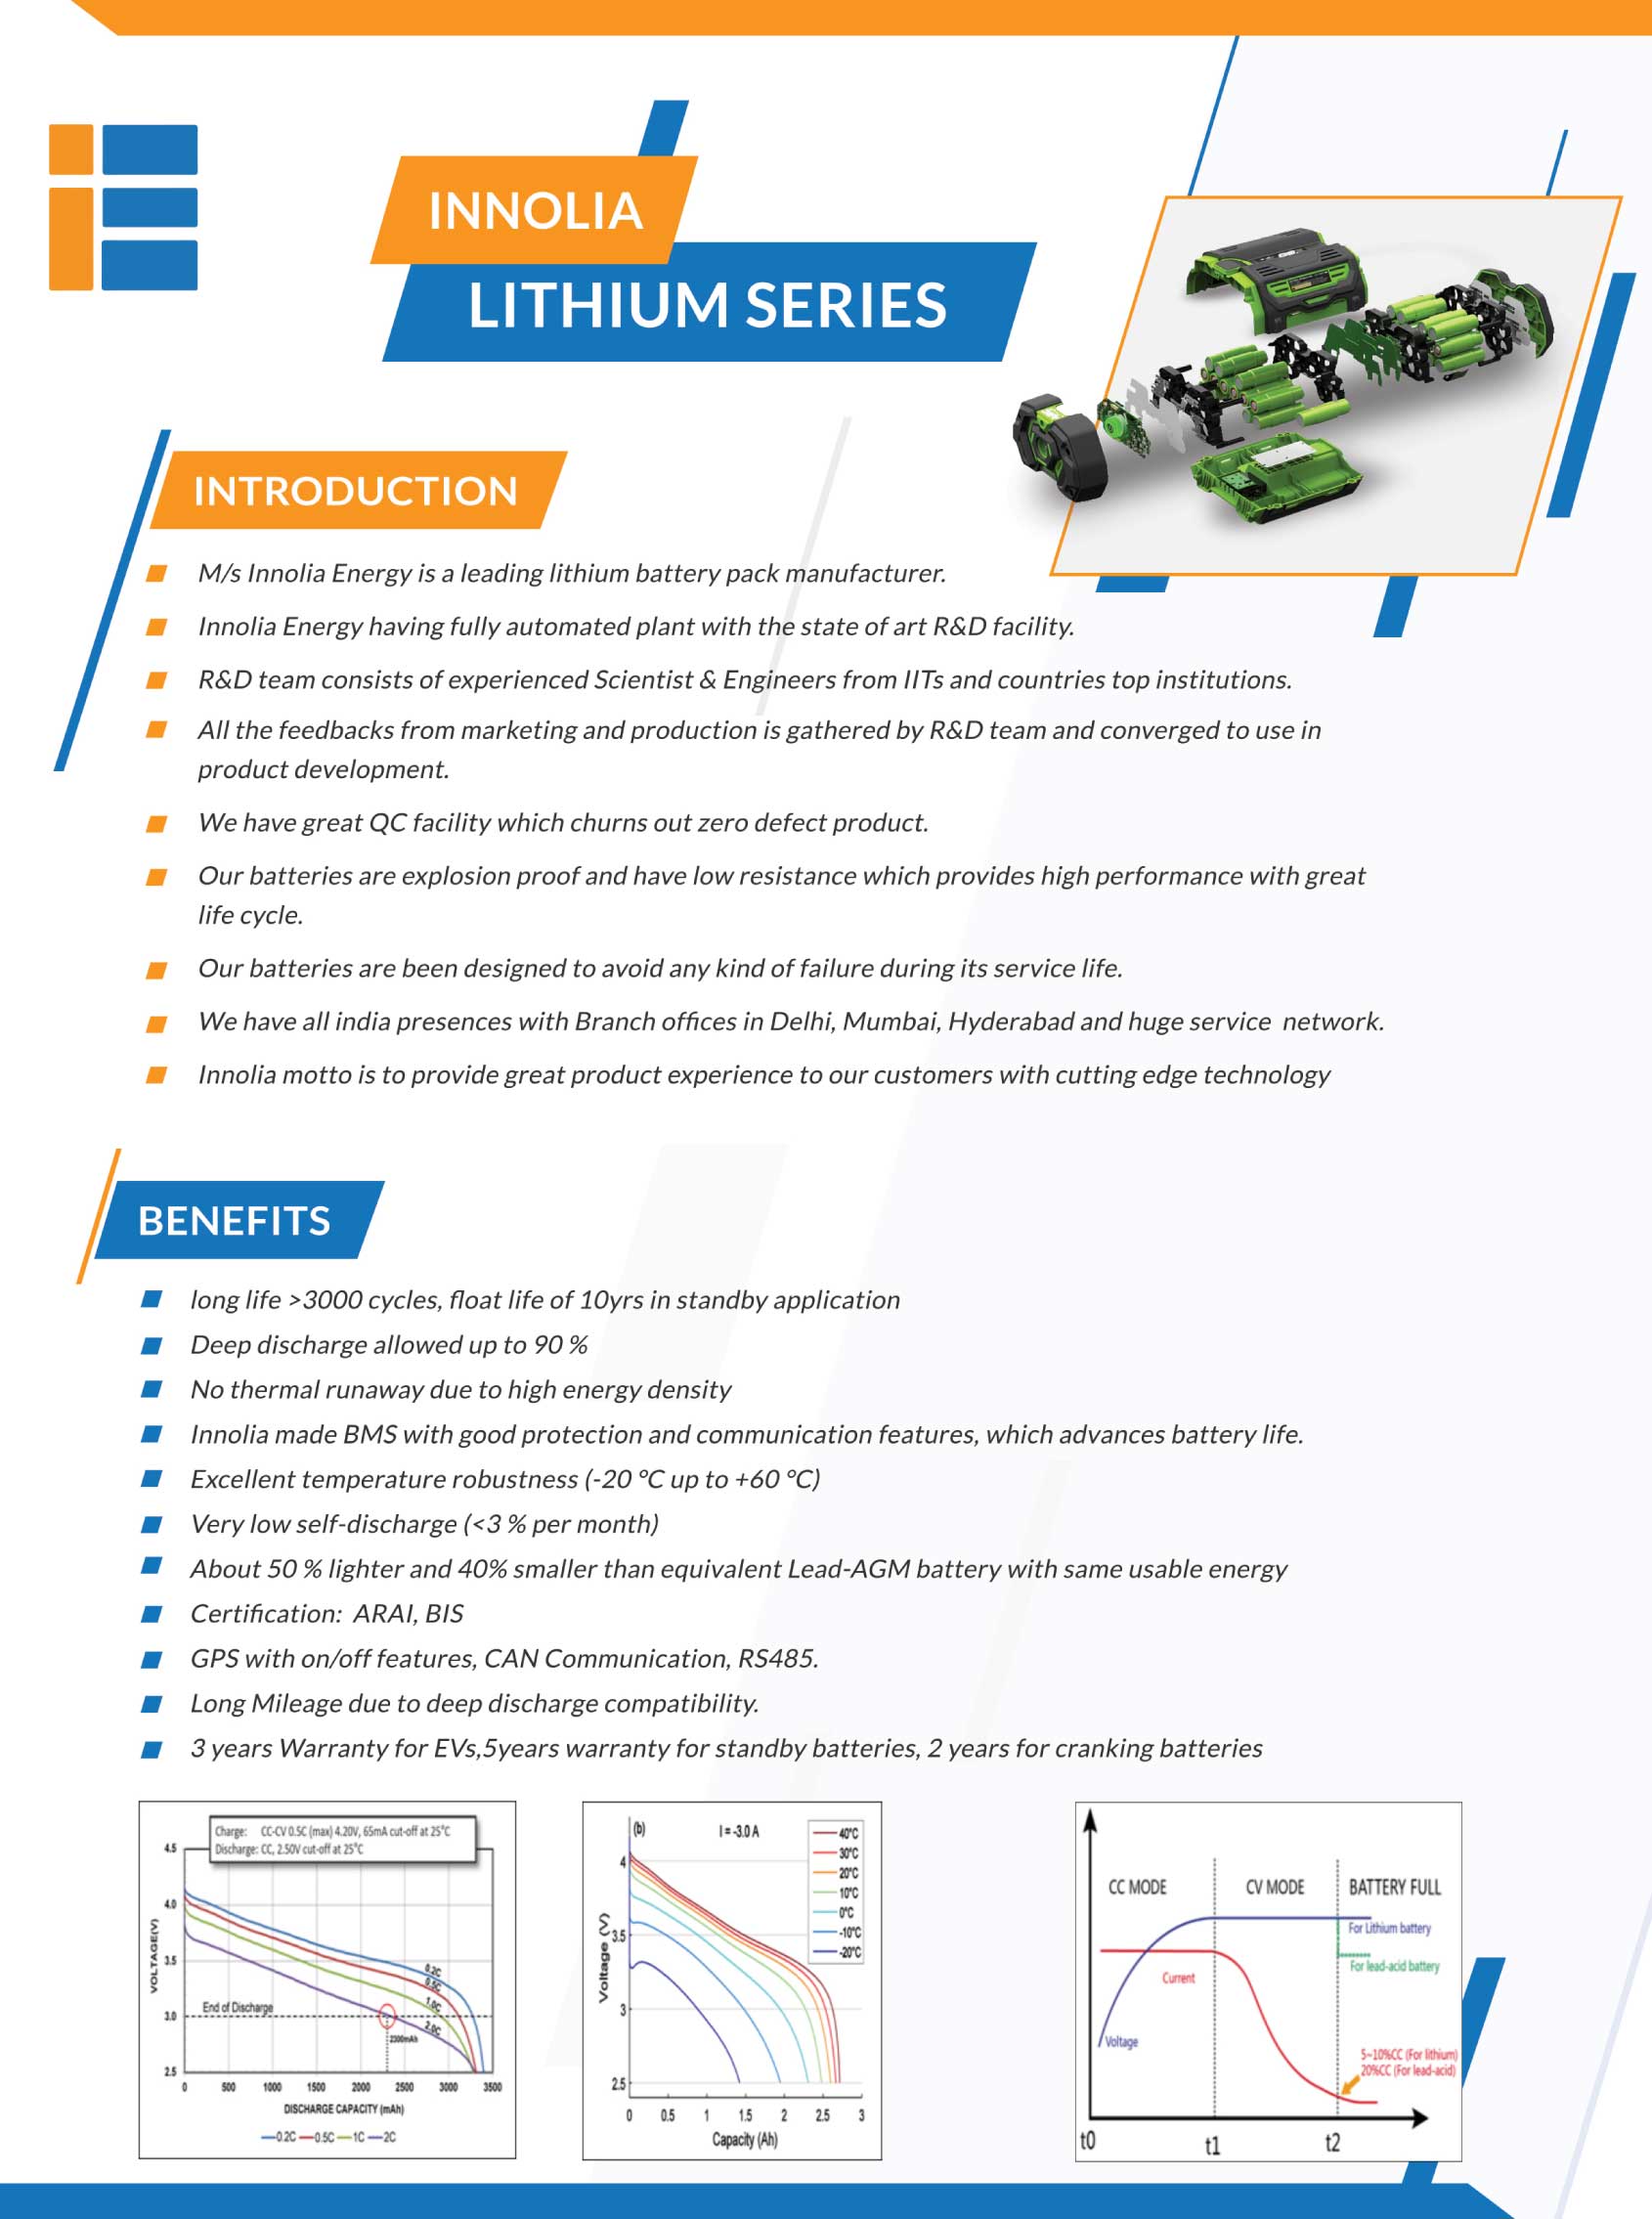 about lithium battery innolia series